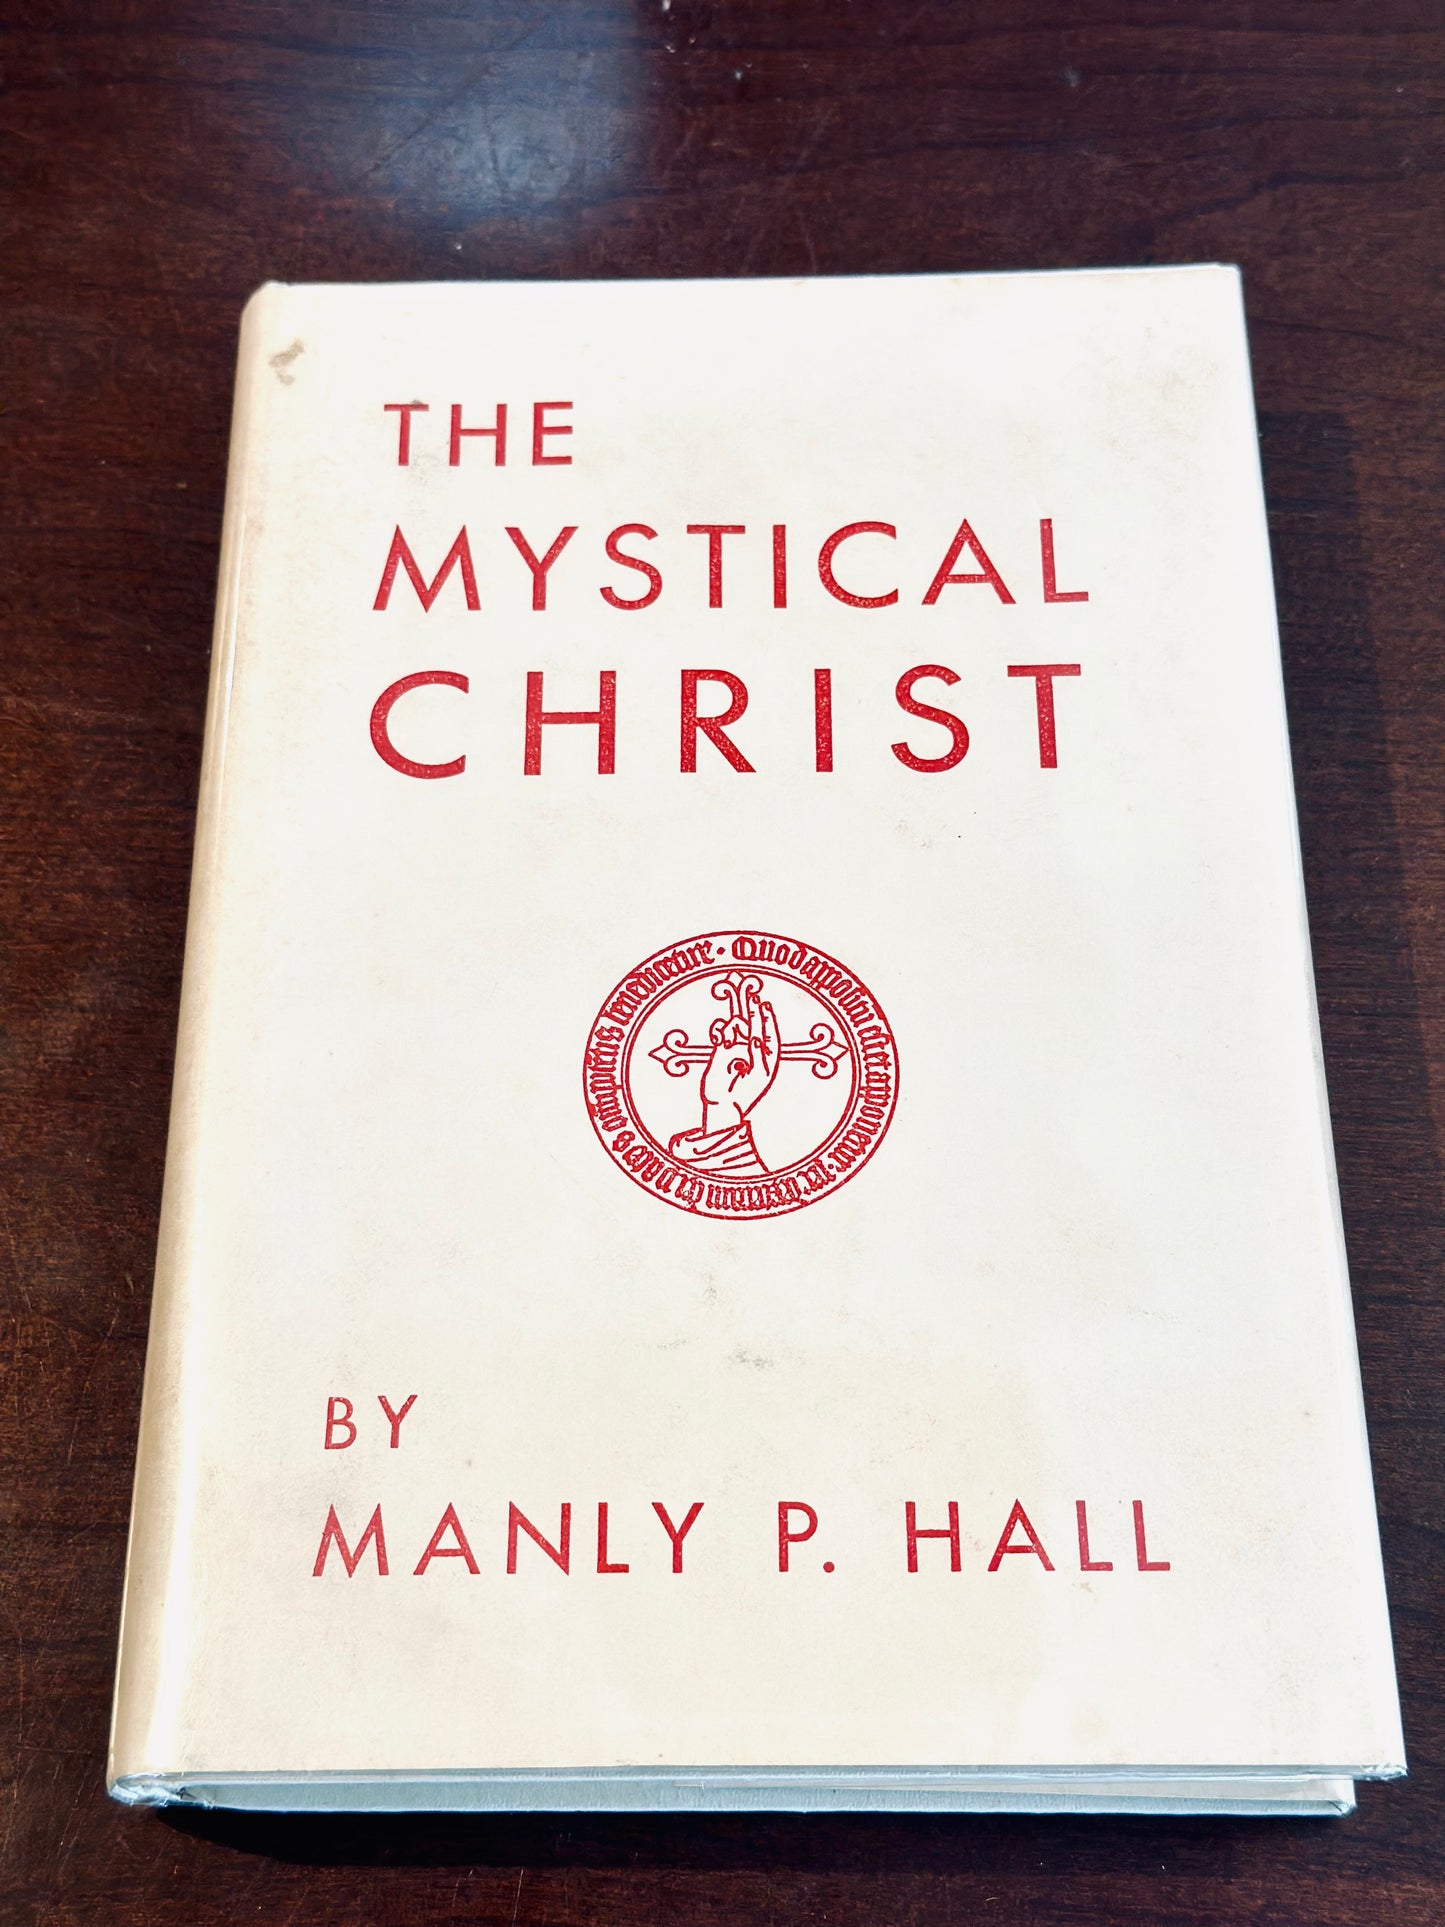 The Mystical Christ by Manly P. Hall